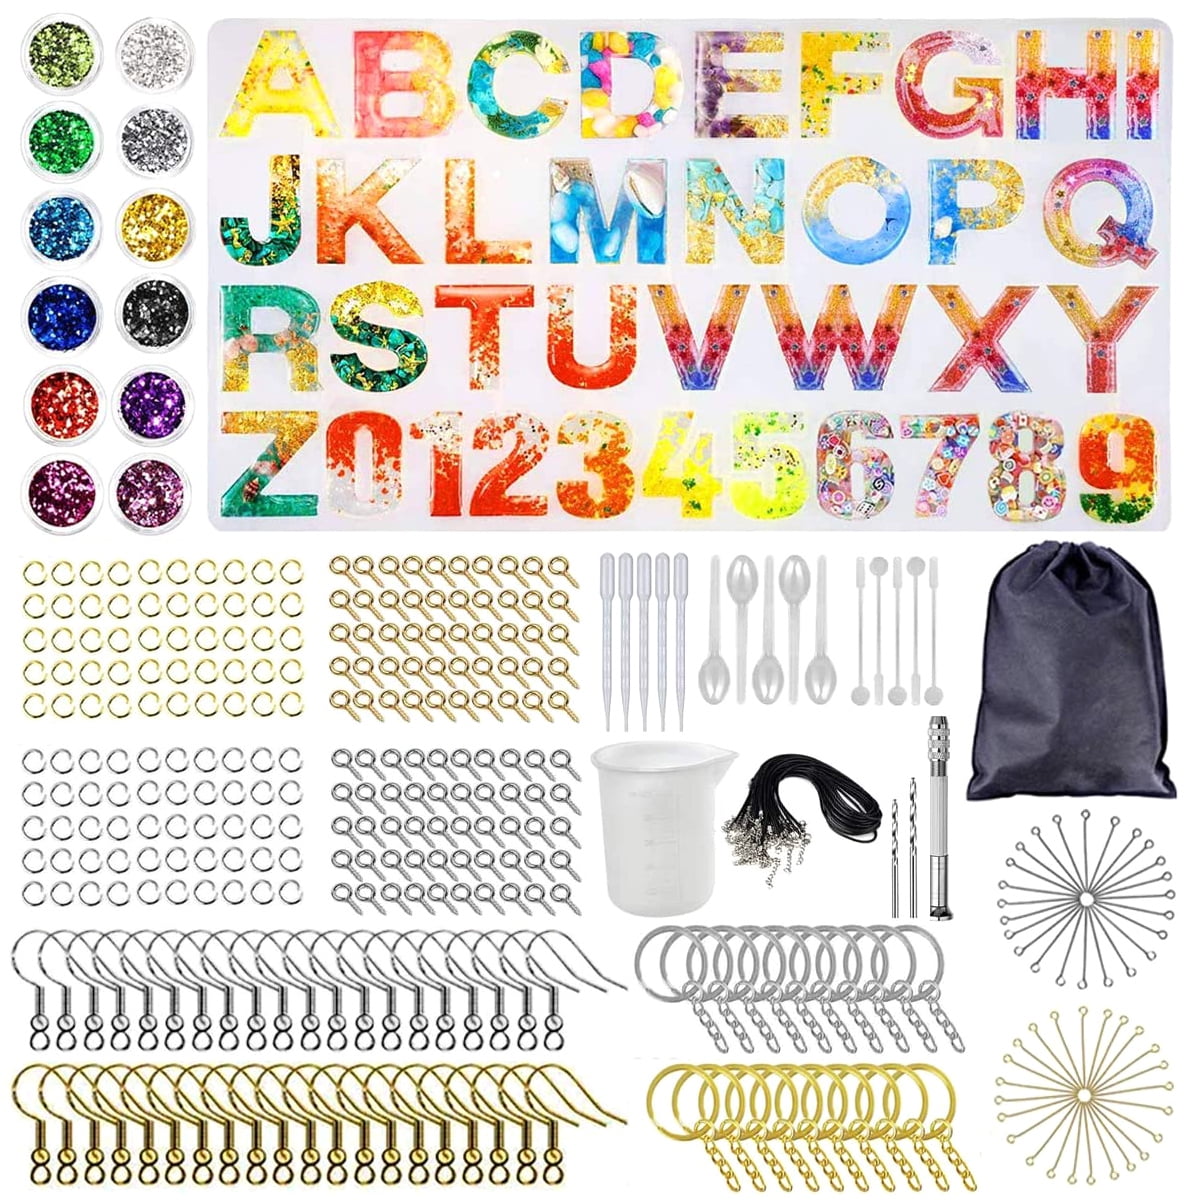 73pcs DIY Resin Letter Molds Alphabet Silicone Mold for Making Resin  Keychains Pendant Jewelry